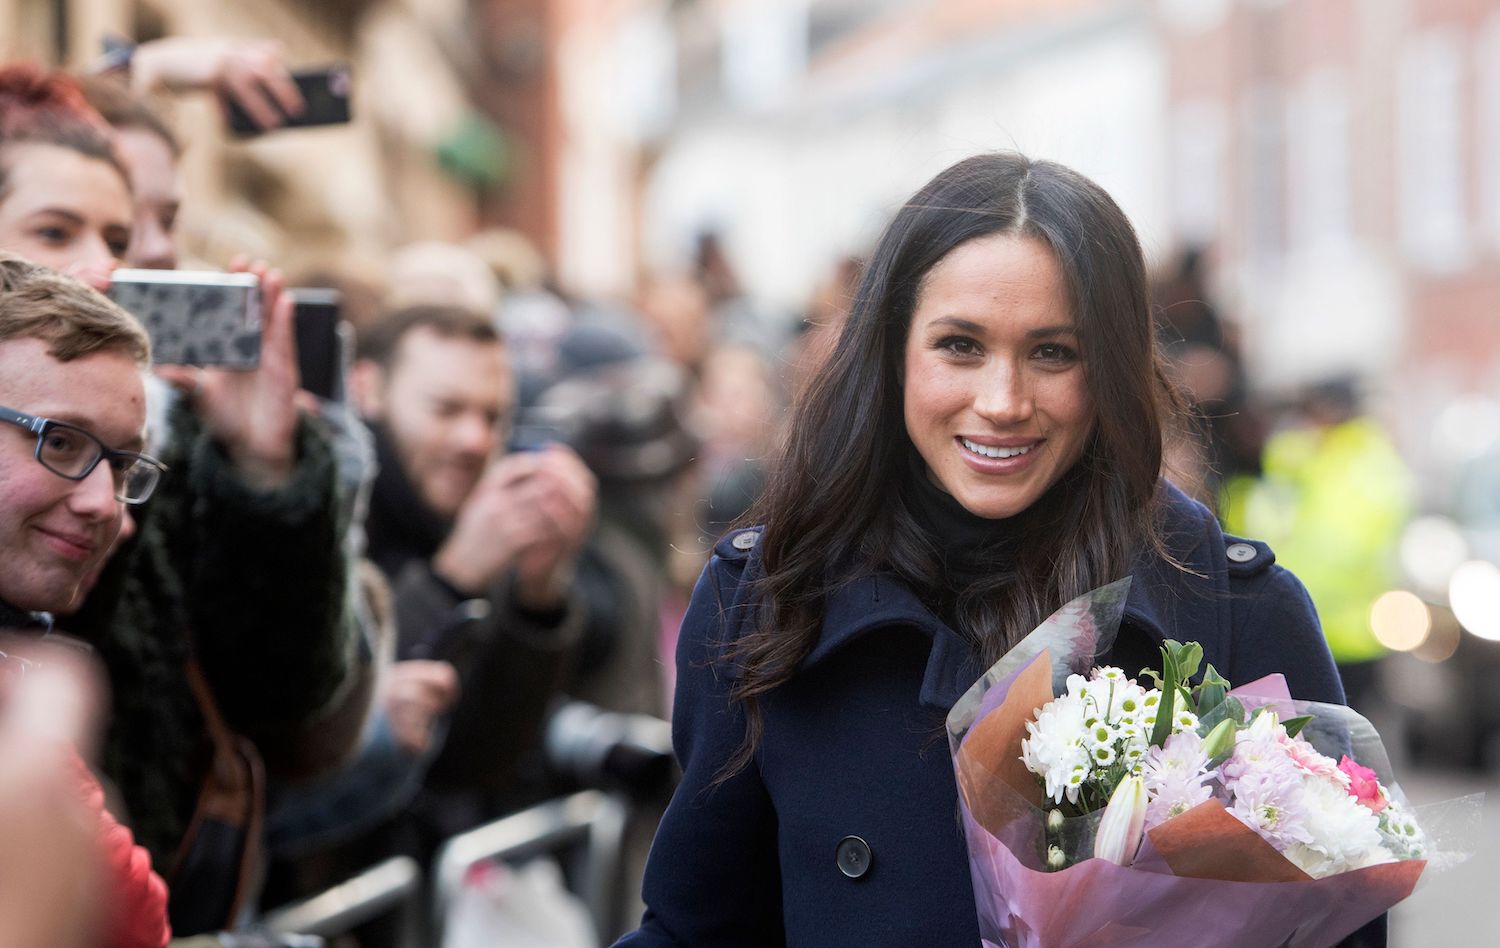 Body Language Expert Weighs in on Meghan Markle’s Claim She Didn’t Know What a Walkabout Was